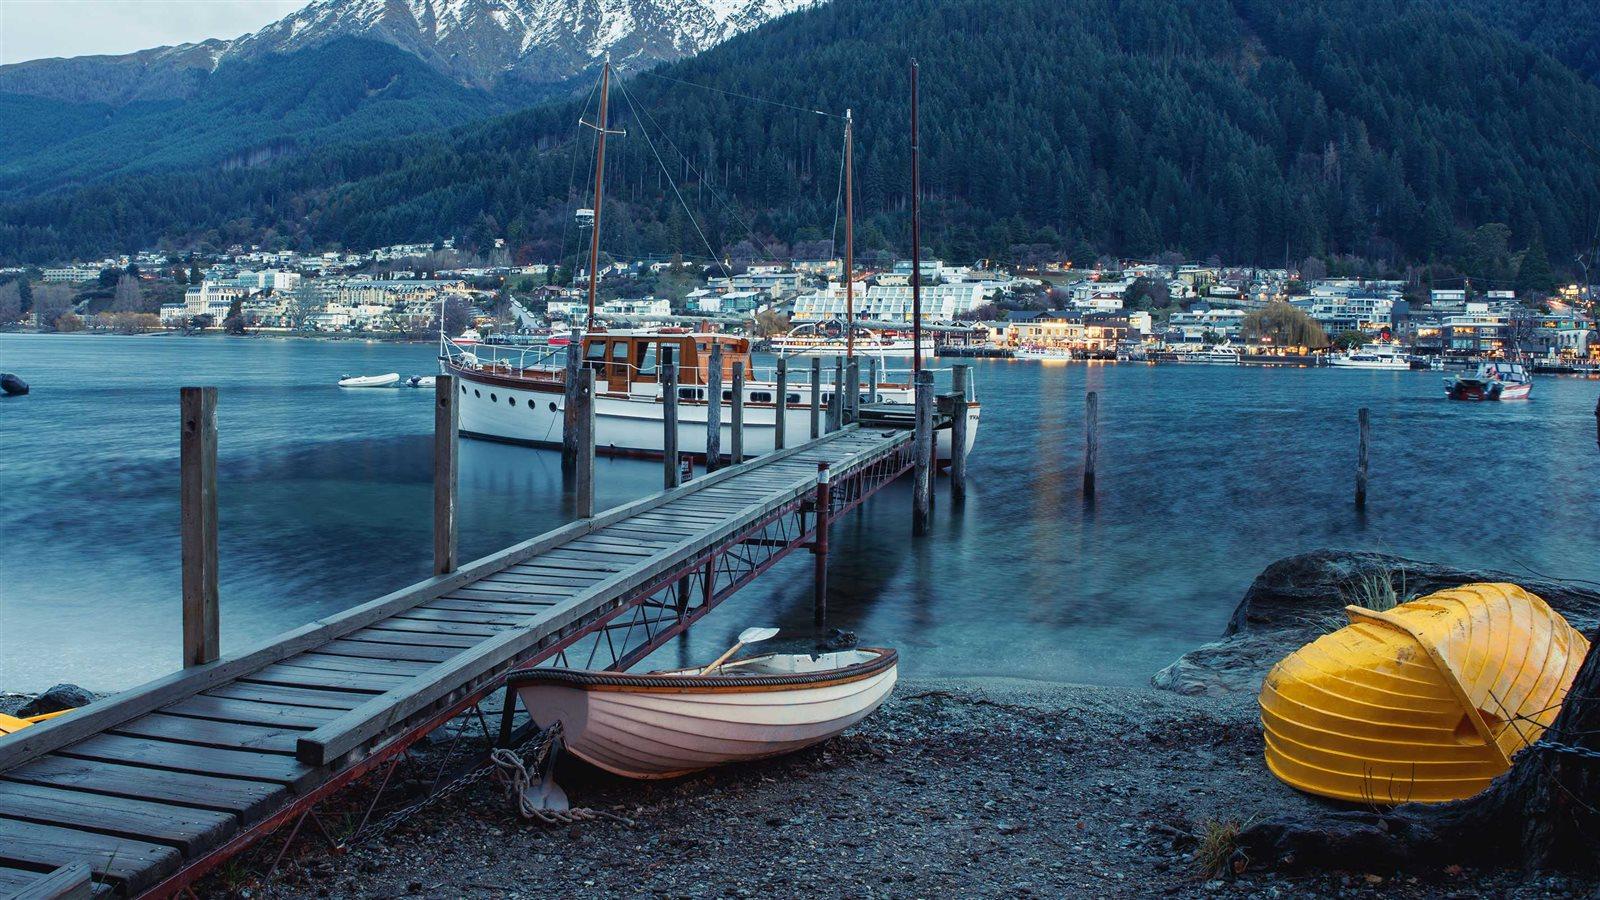 A Dock in New Zealand